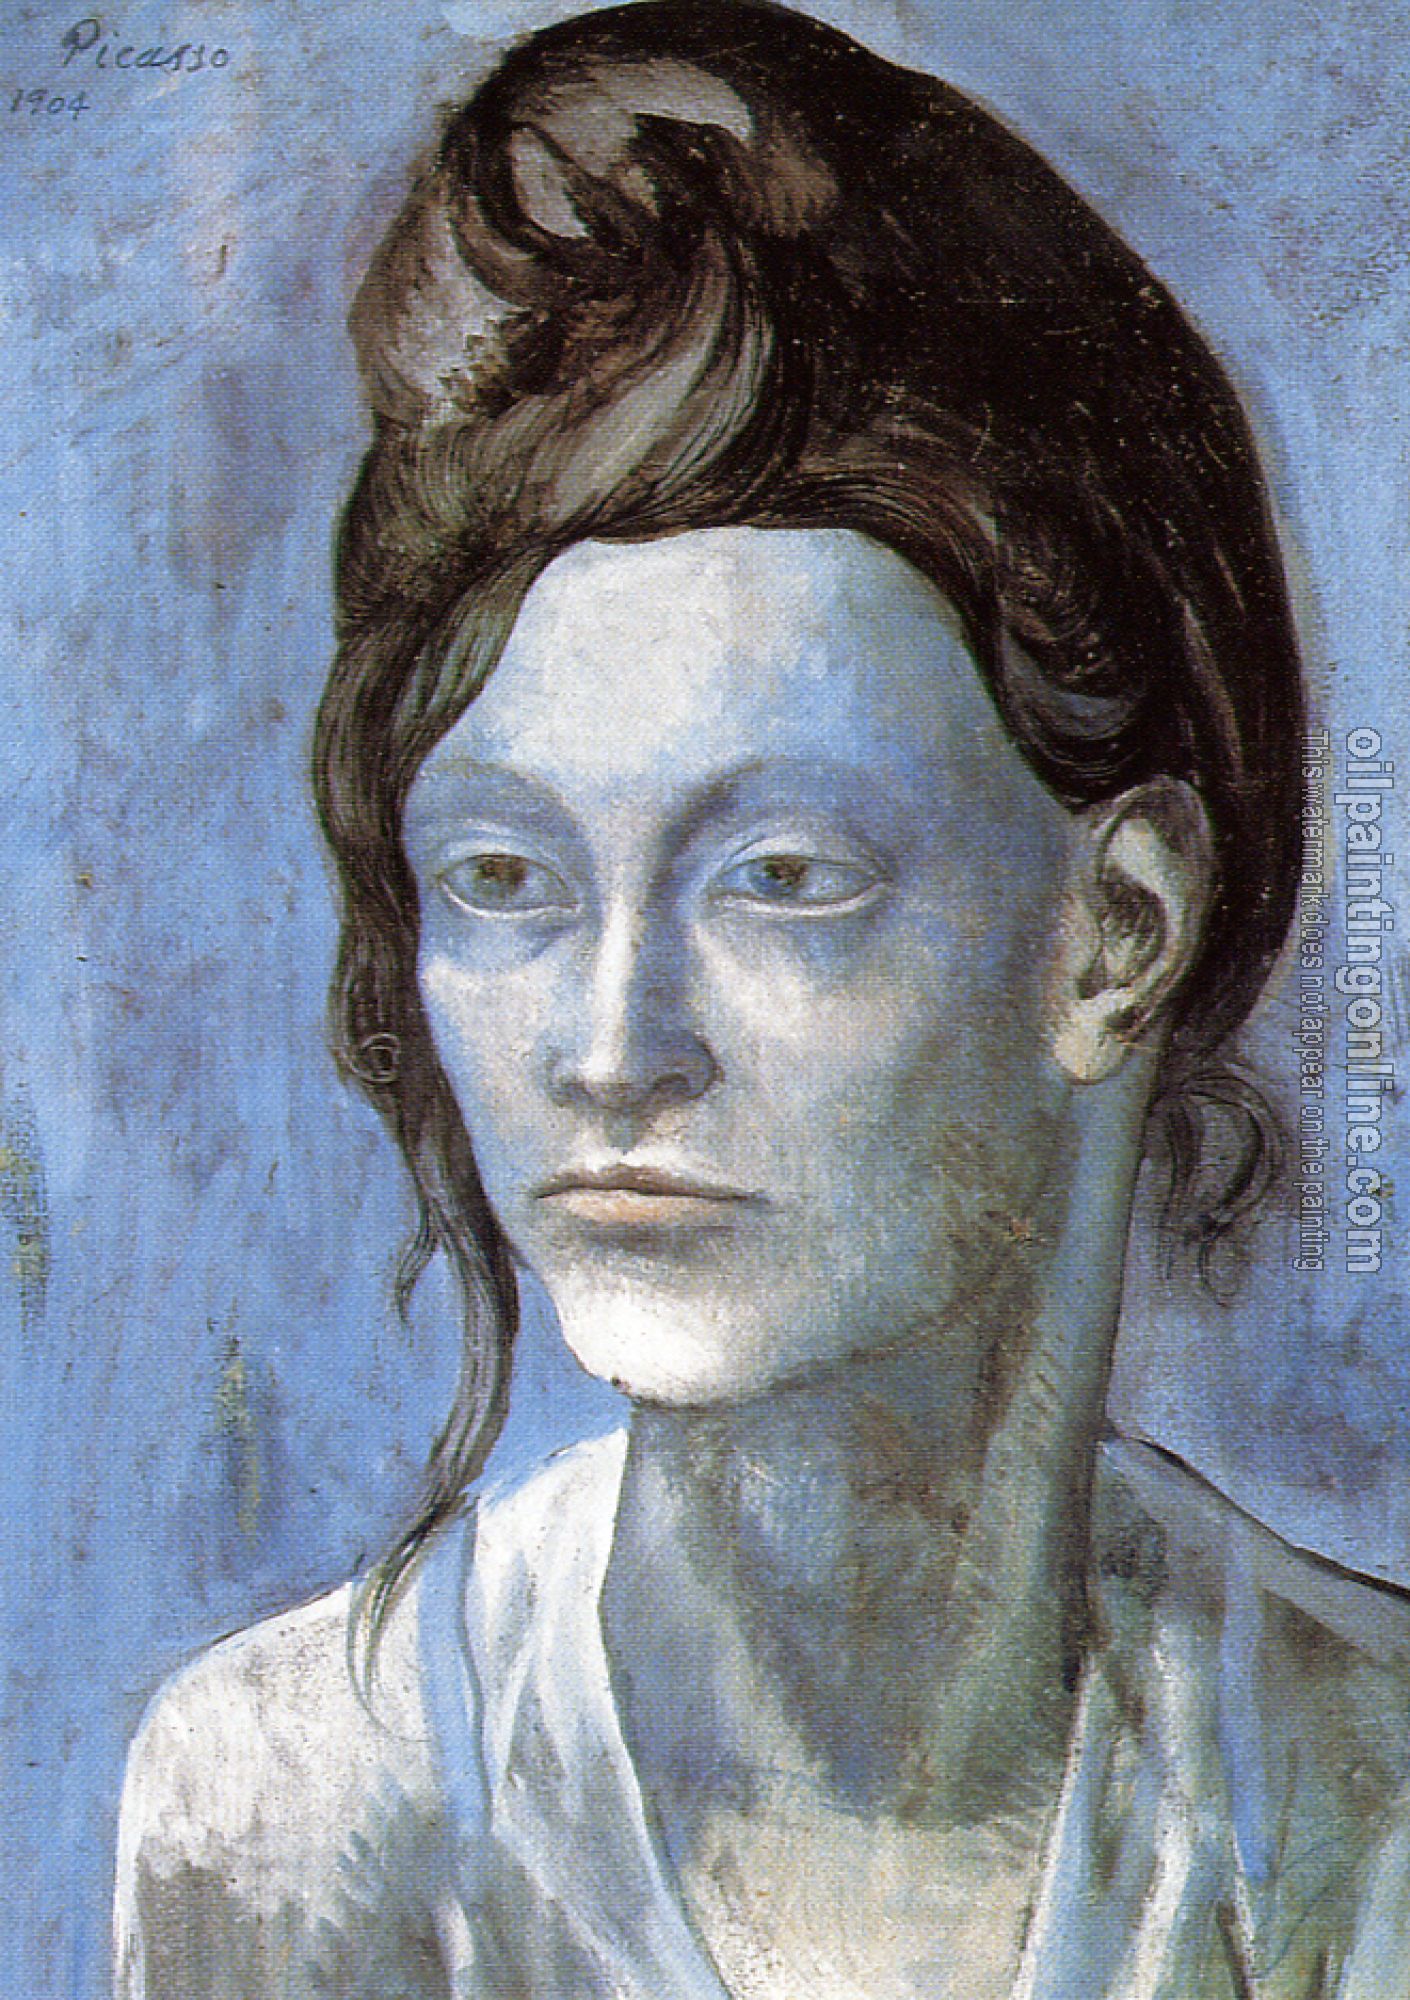 Picasso, Pablo - woman with a helmet of hair